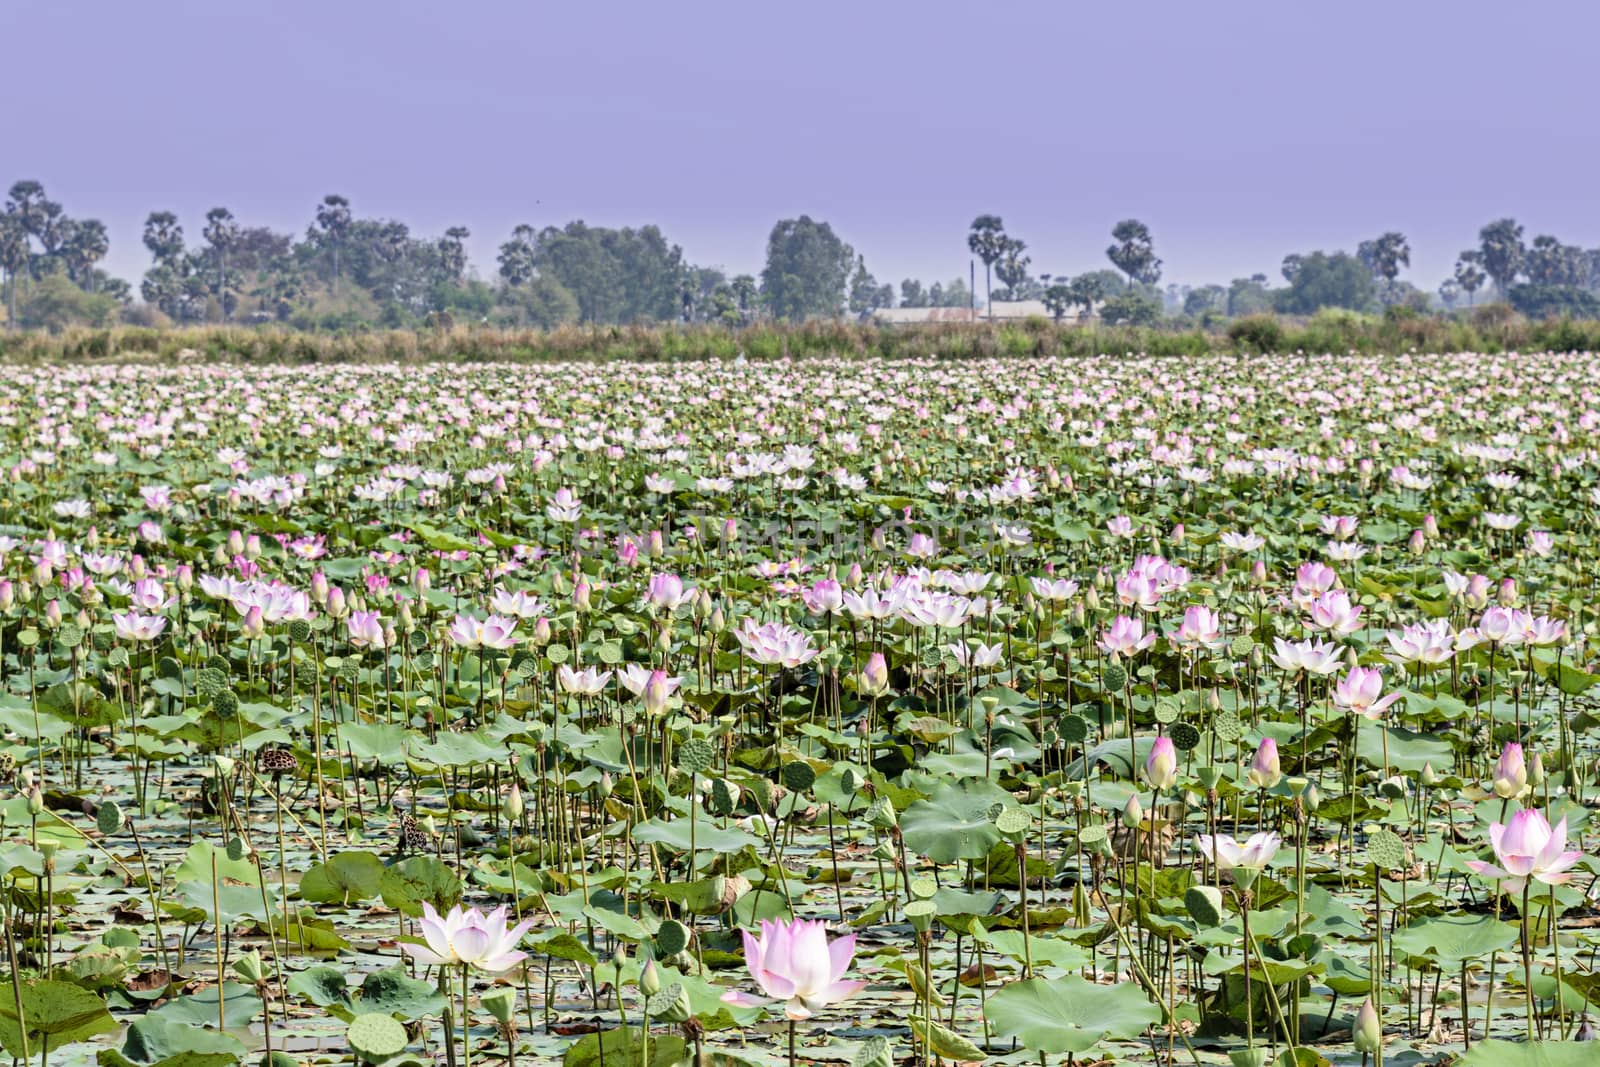 Cambodia, Tonle Sap - March 2016: Lotus farm - 'fields' of lotus plants in ponds	